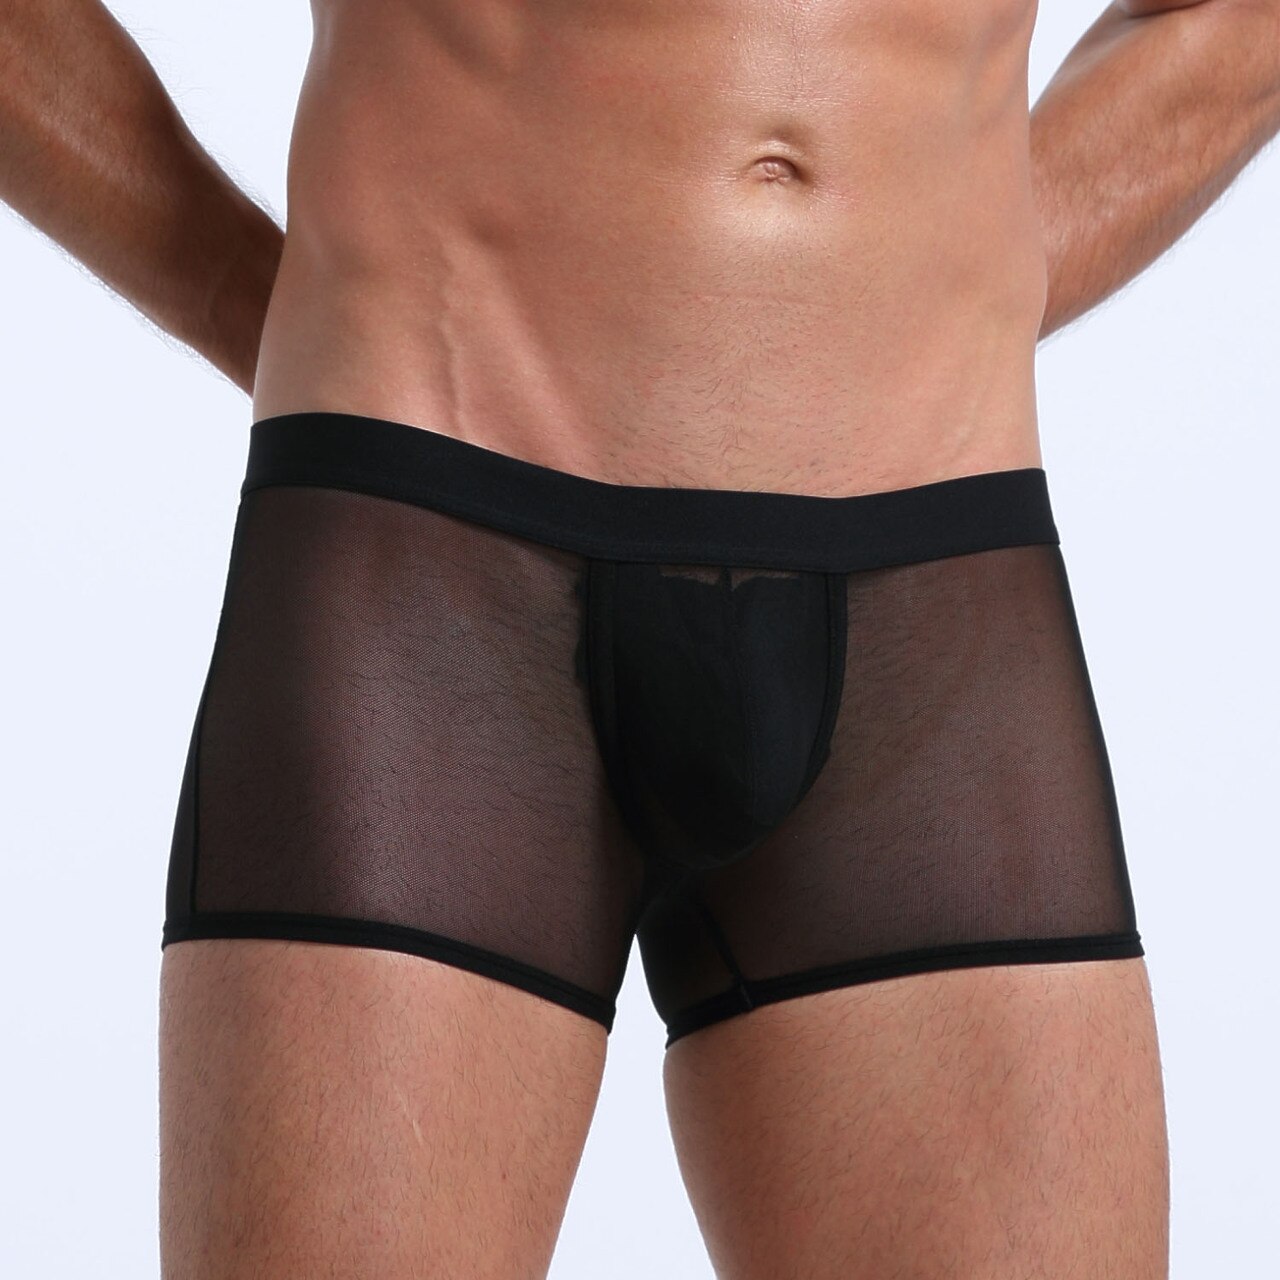 Mens Stretch Mesh Sheer Boxer Briefs with Pouch Front Black